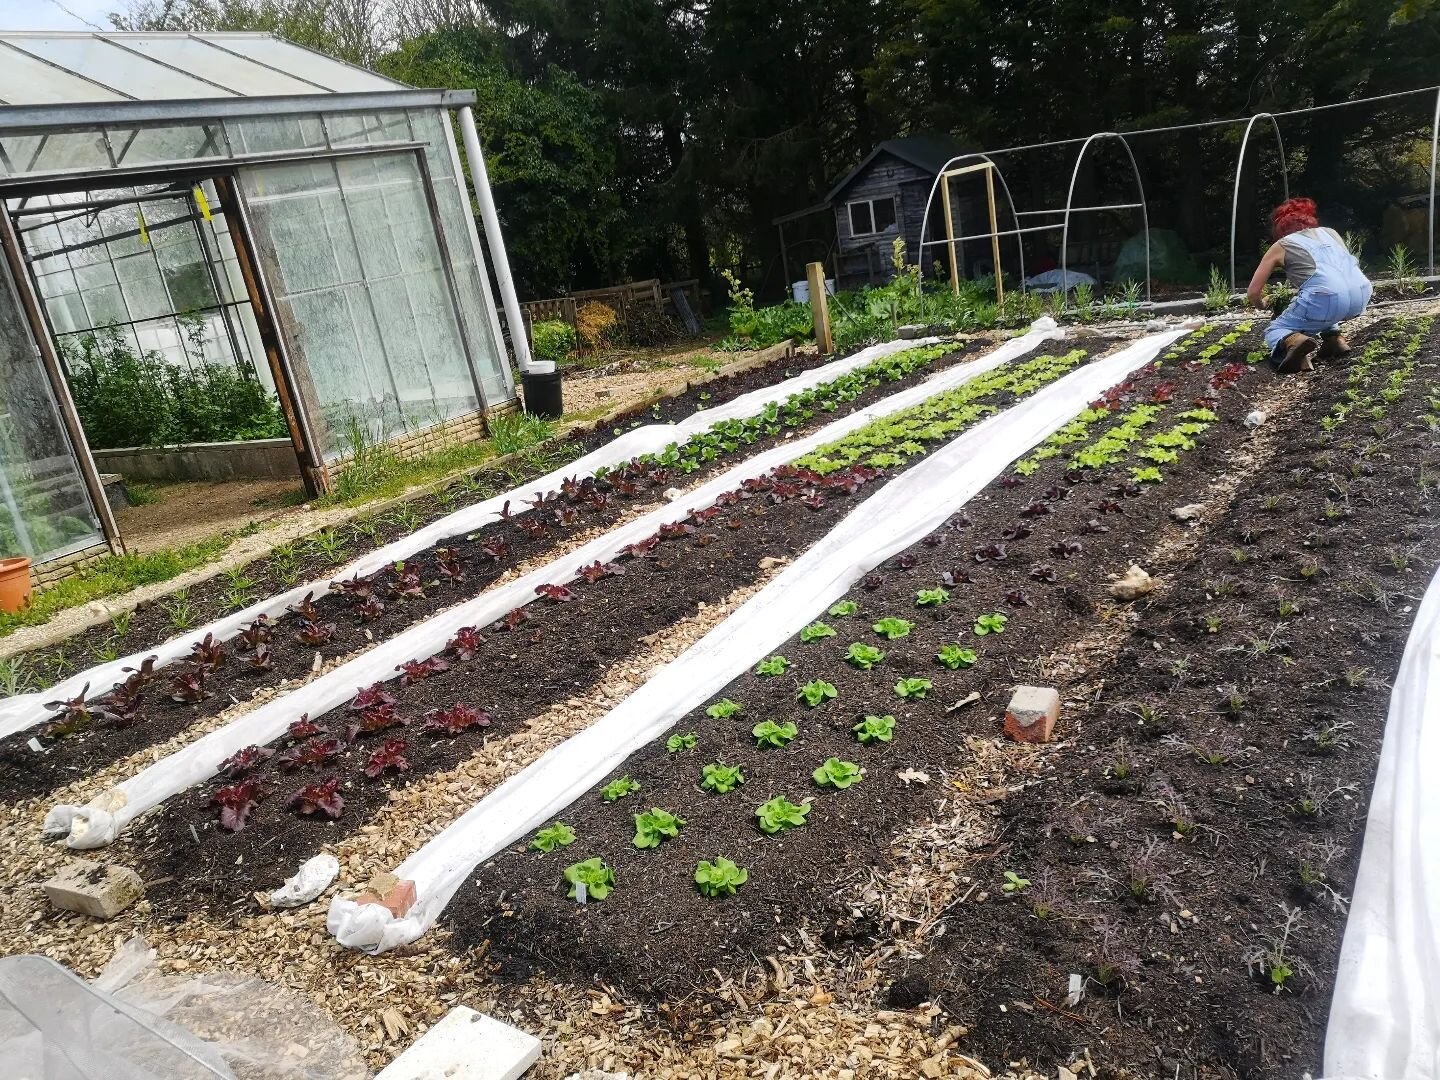 New season salads are now all in the ground and had their first pick this week after putting on some amazing growth!

Almost every bed on this site is now full apart from the ones waiting for the more tender crops like courgettes and beans.

The toma